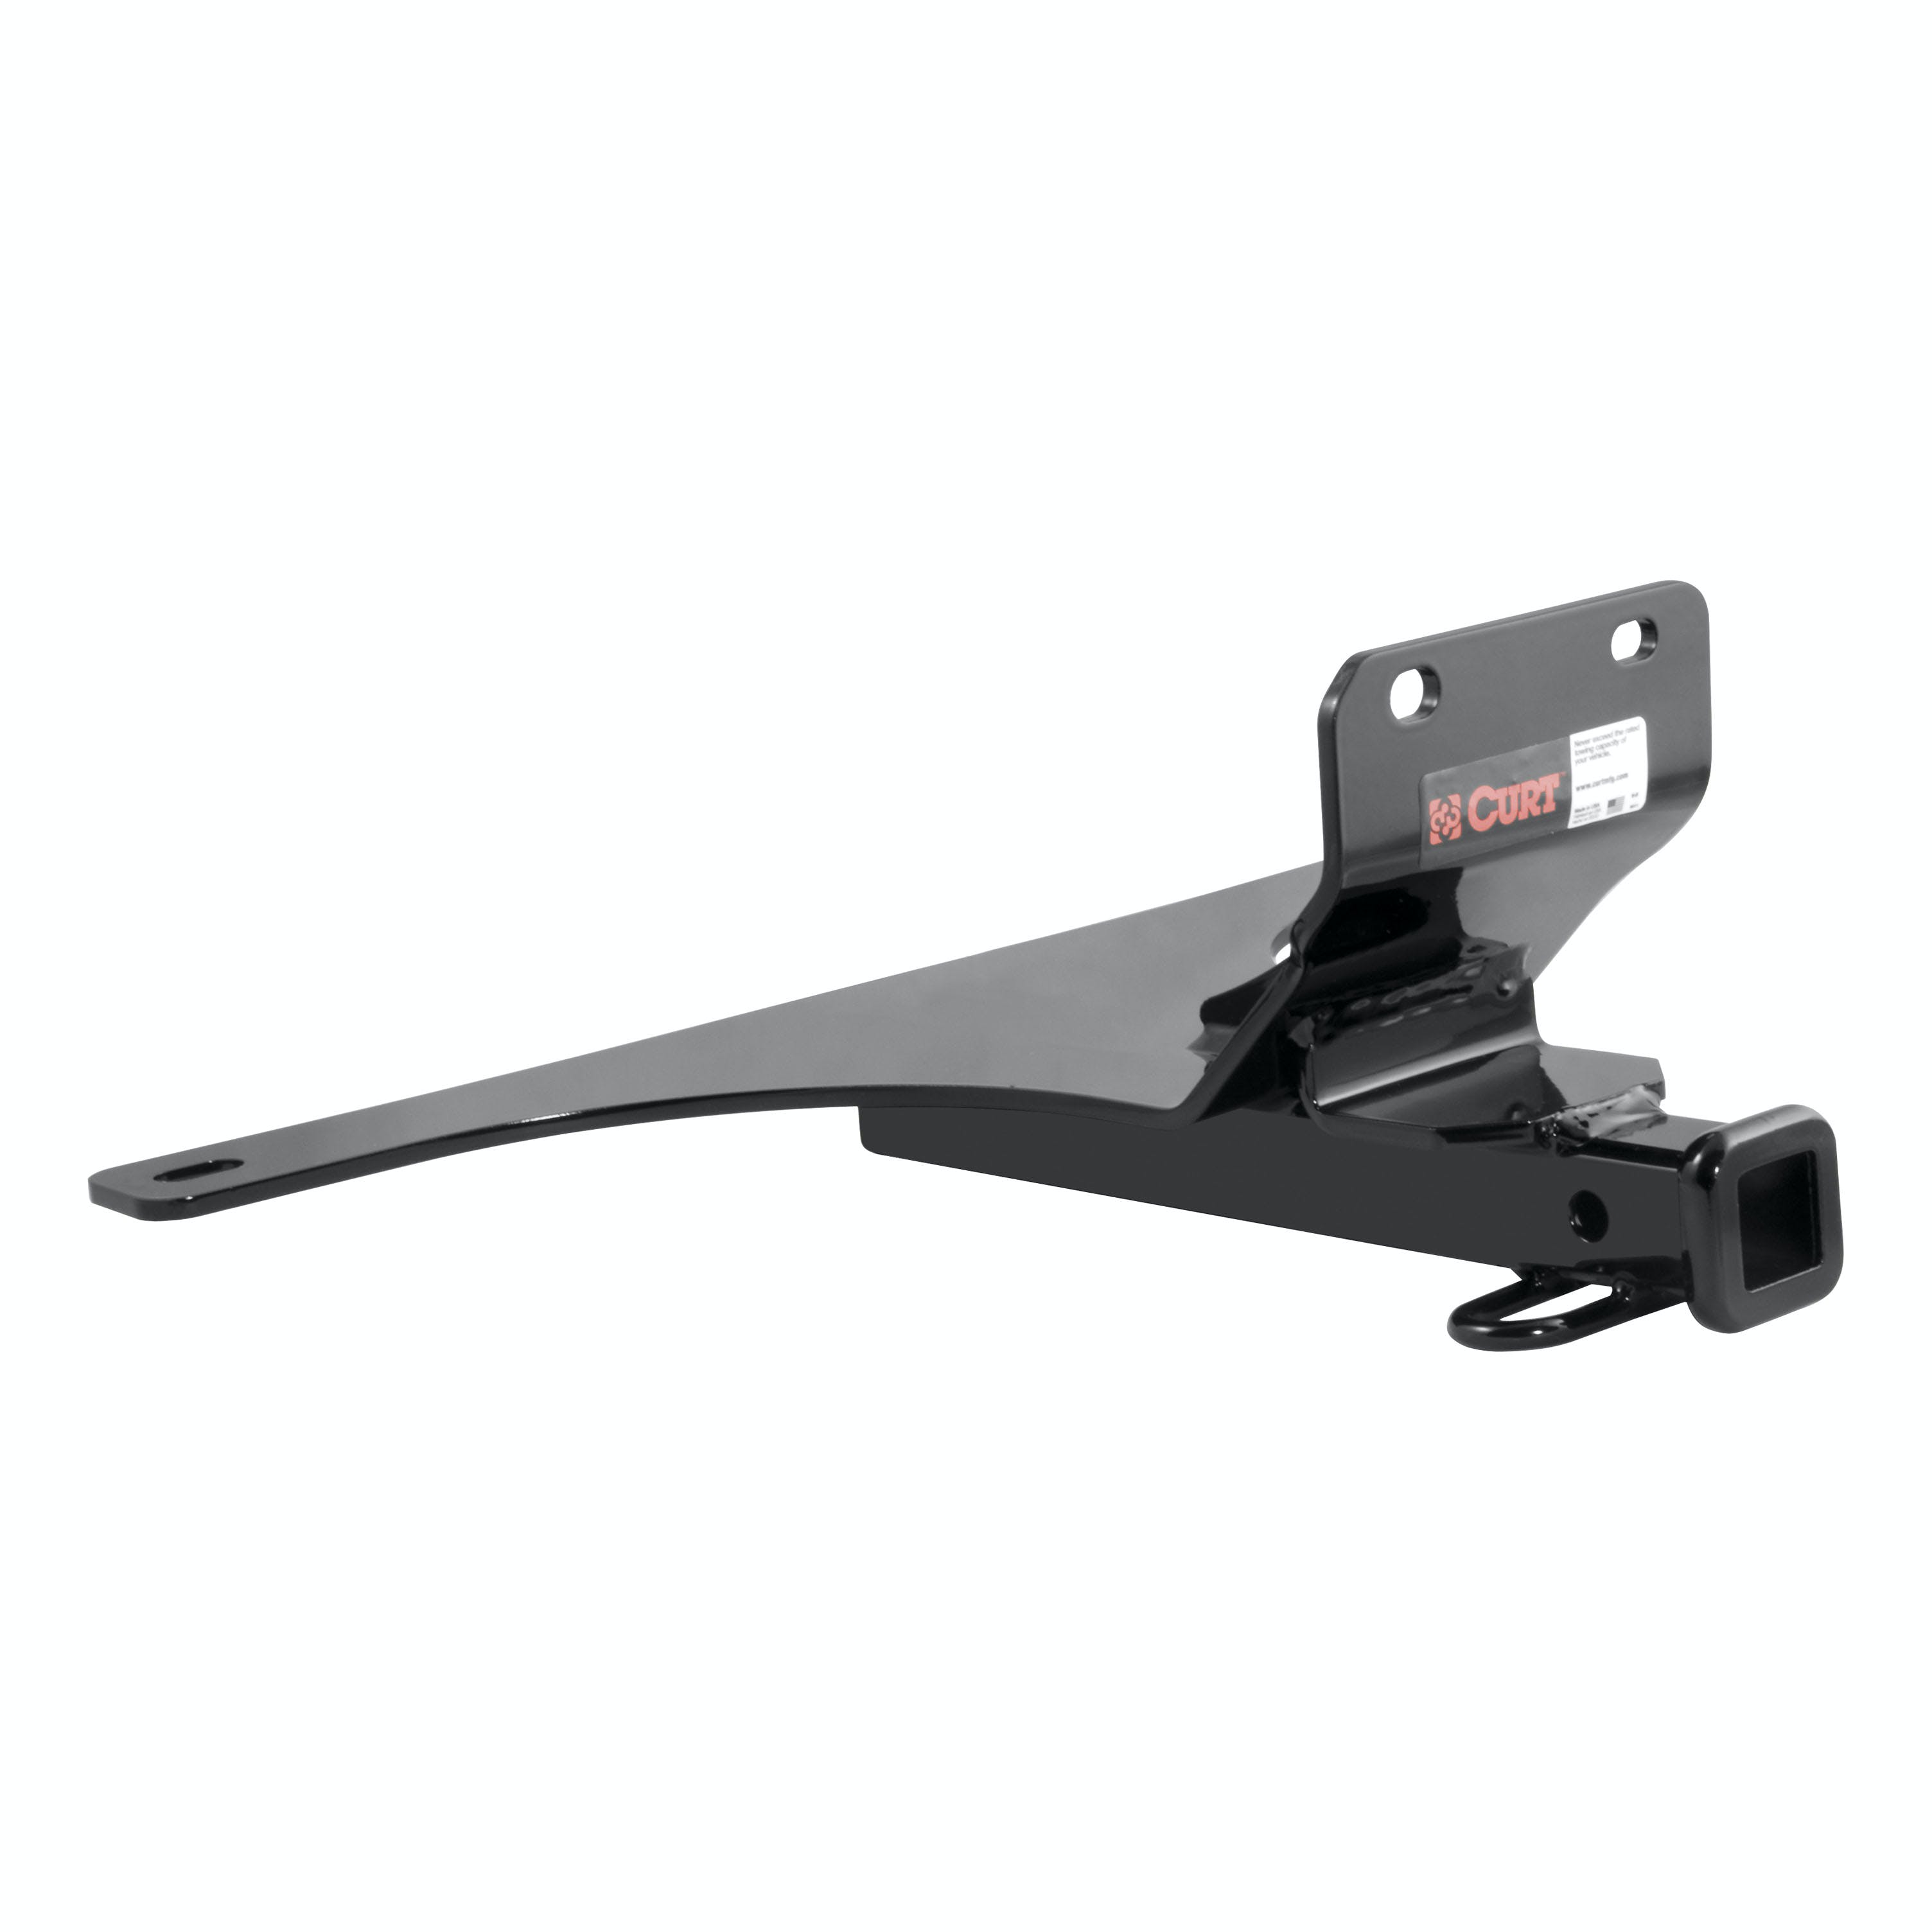 CURT 11140 Class 1 Trailer Hitch, 1-1/4 Receiver, Select Saab 9-3